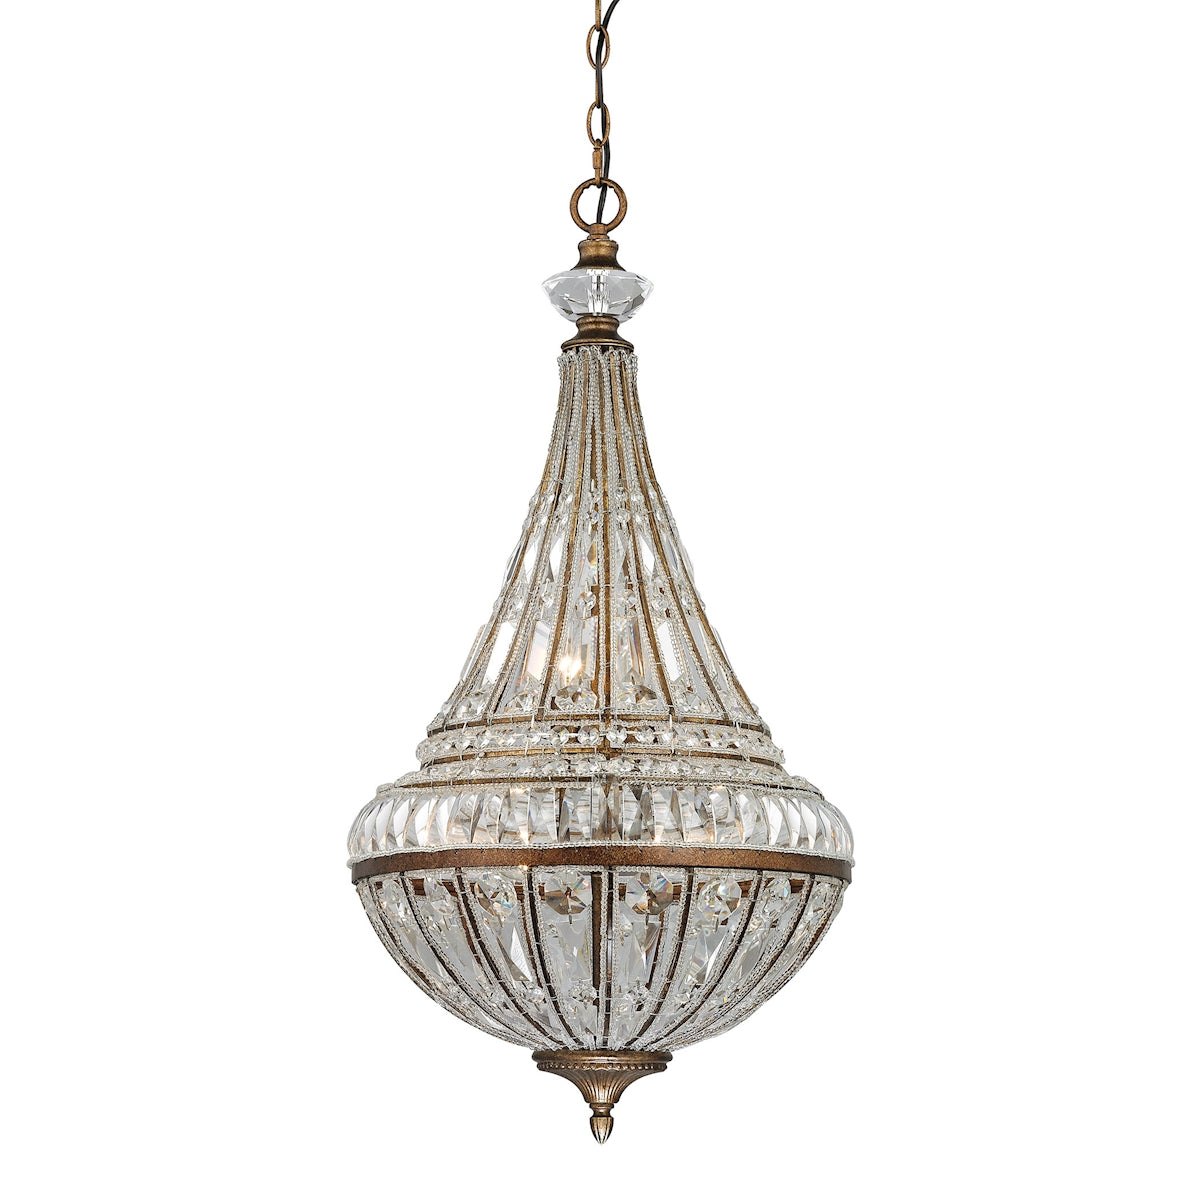 ELK Lighting 46047/6 Empire 6-Light Chandelier in Mocha with Crystal and Glass Beads